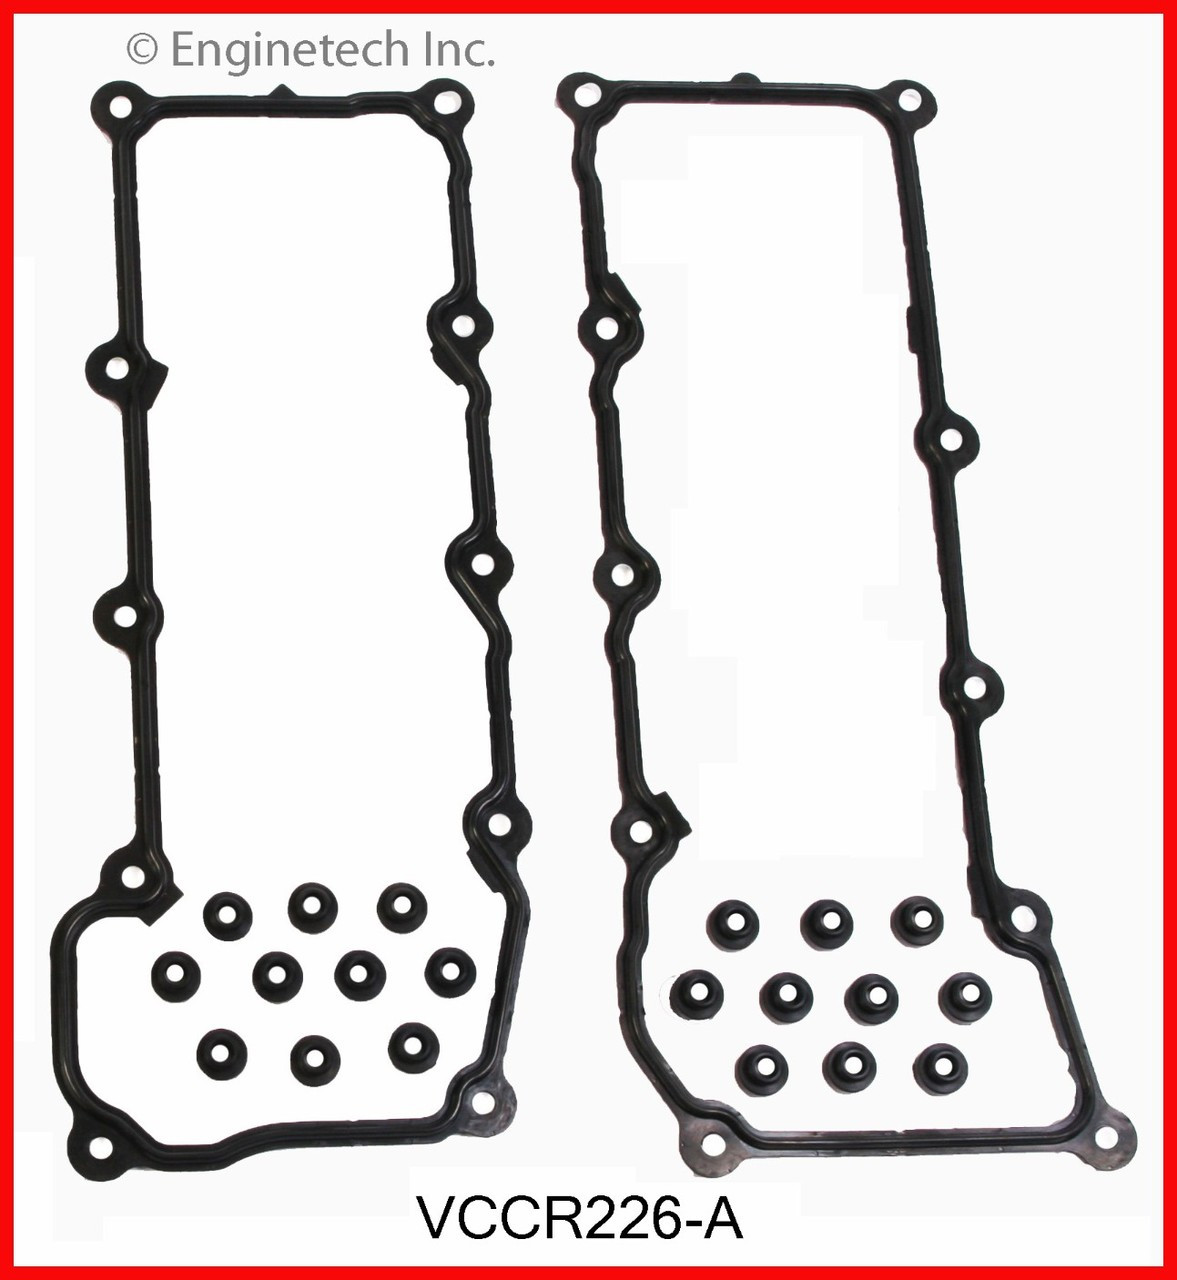 2002 Jeep Liberty 3.7L Engine Valve Cover Gasket VCCR226-A -2